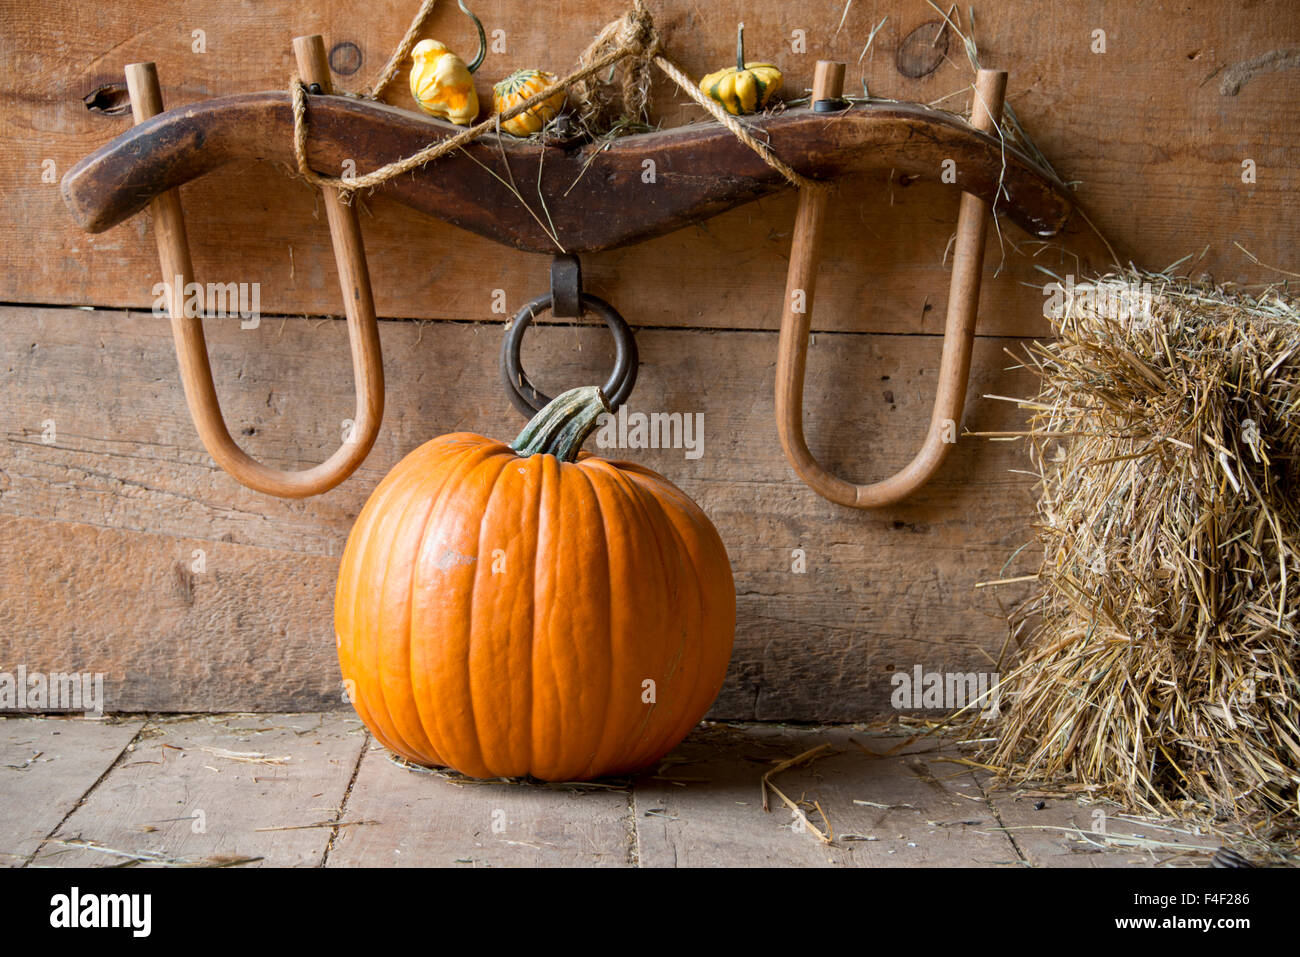 New York, Cooperstown, Farmers Museum. Pumpkin in barn with bale of hay. (Large format sizes available) Stock Photo